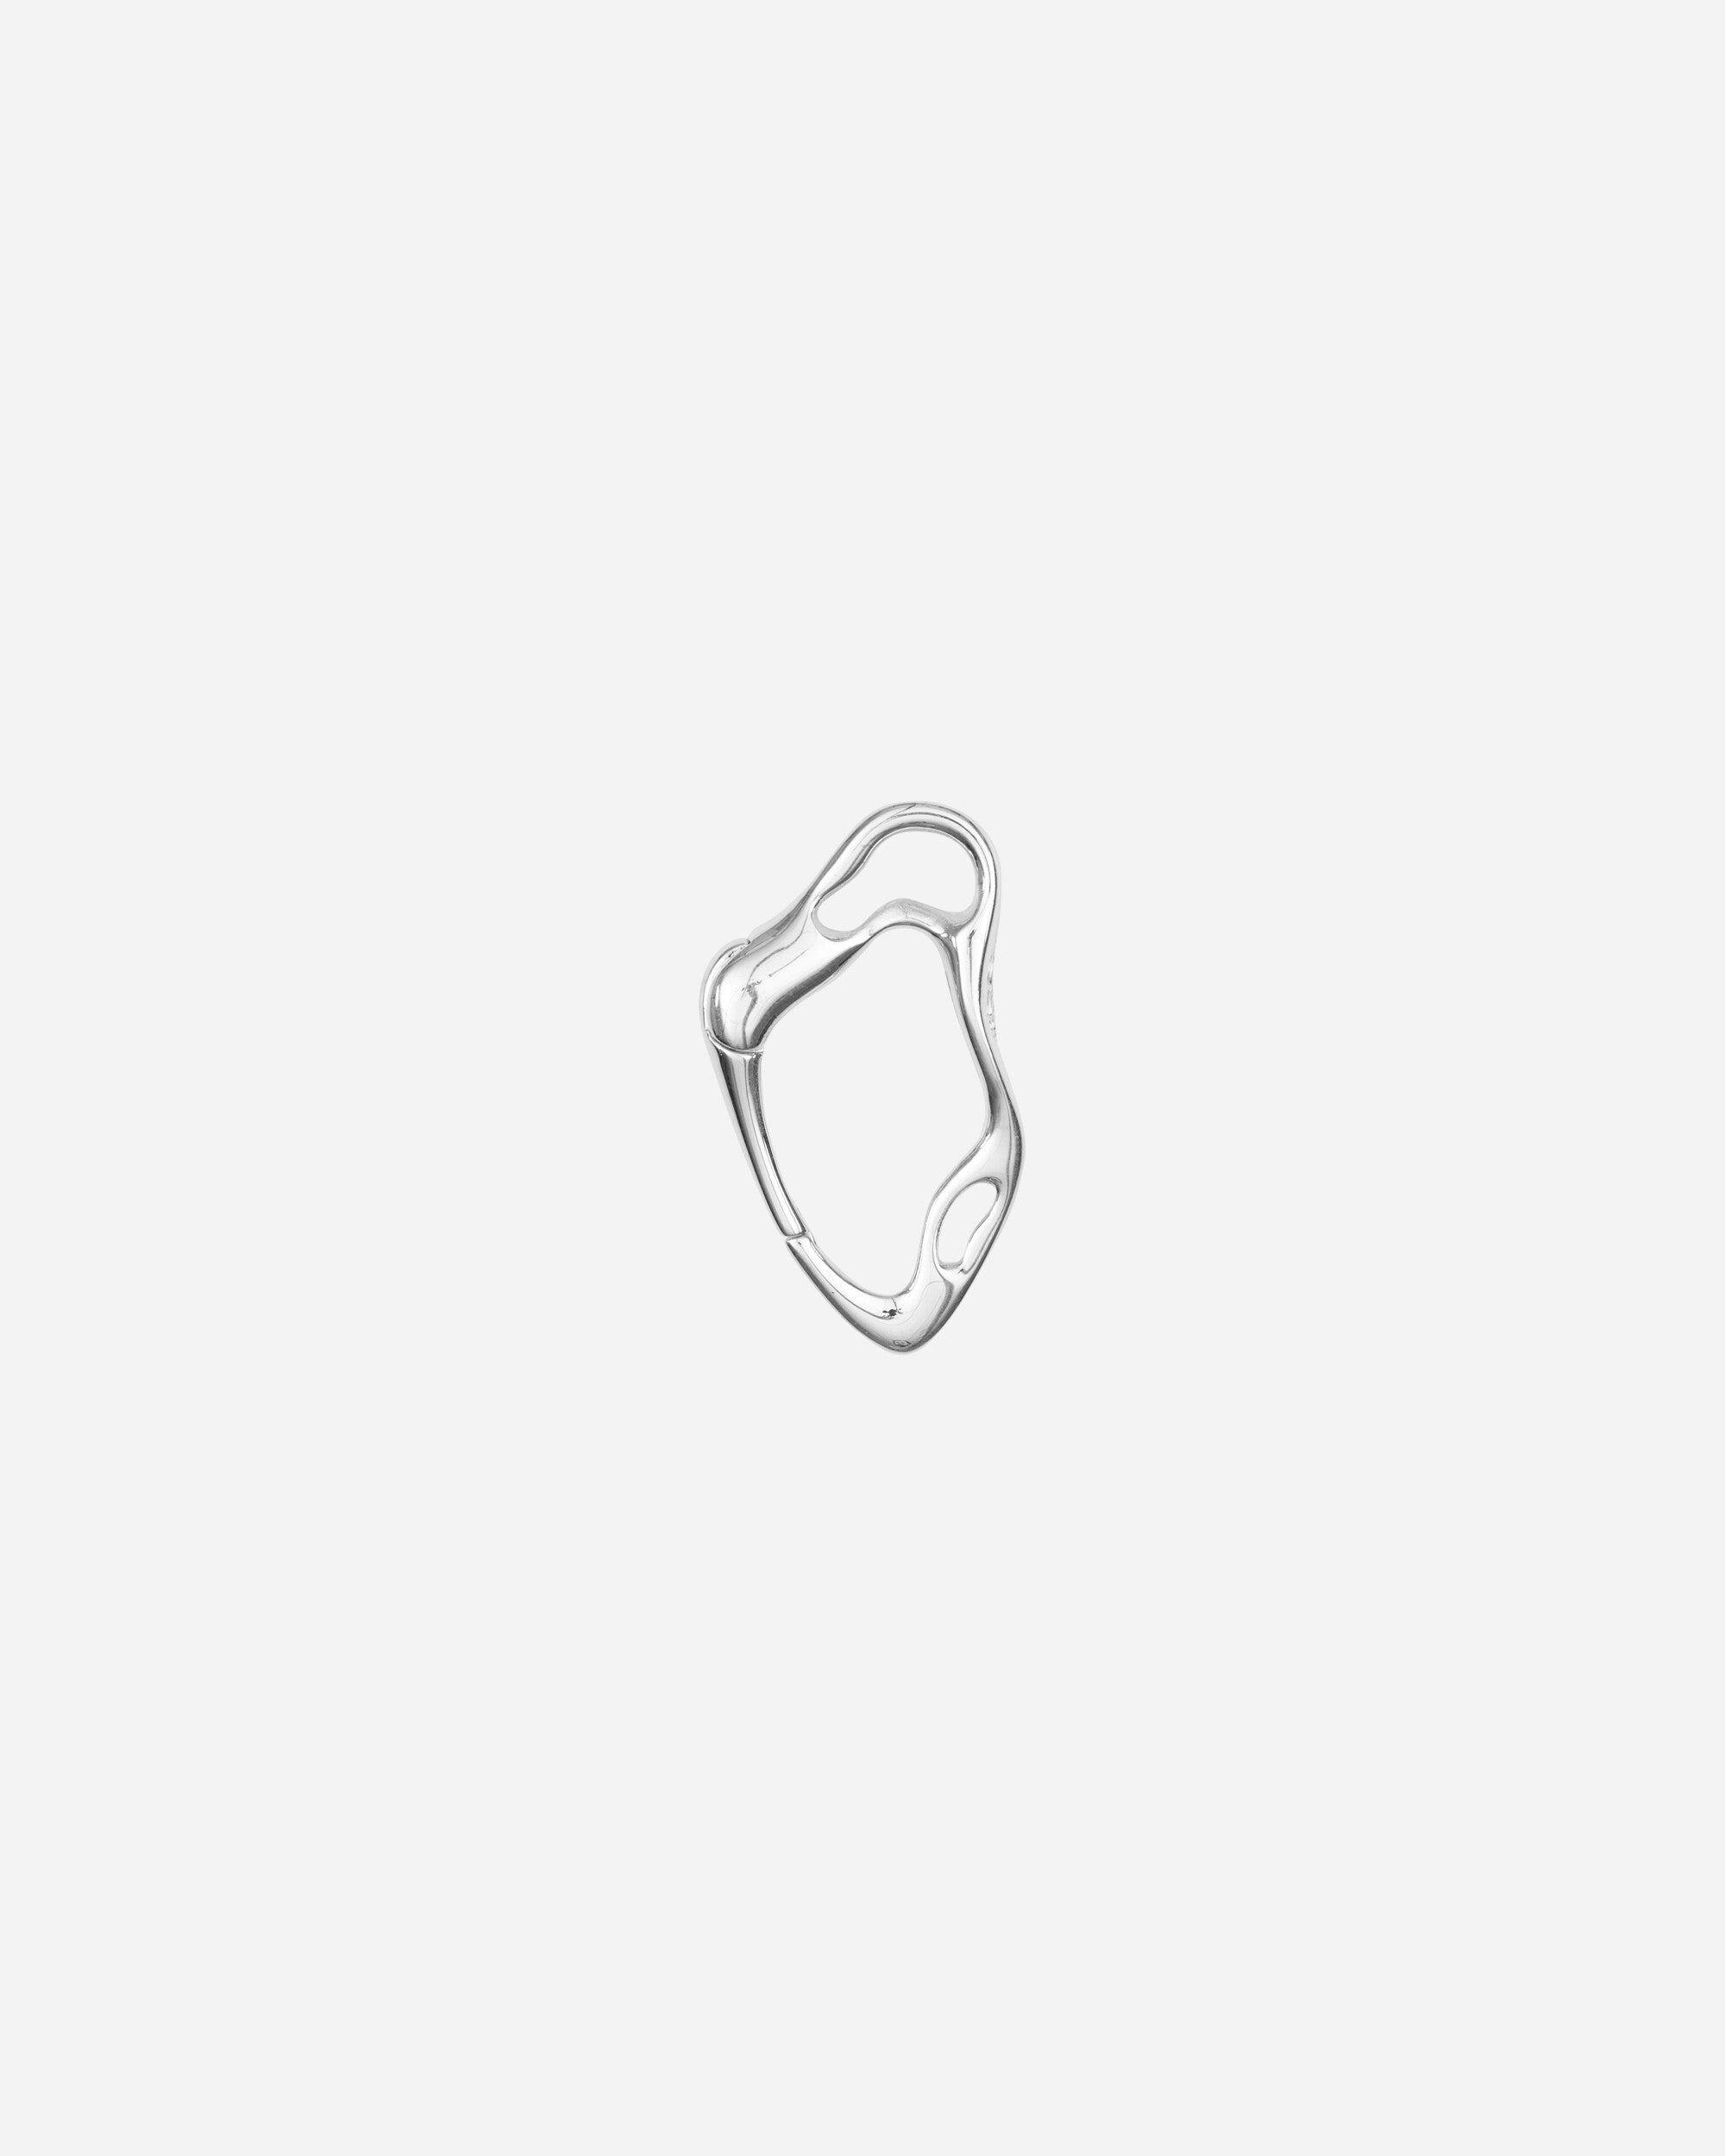 Octi Octi Clip (Large) Silver Jewellery Earrings OCC SL1